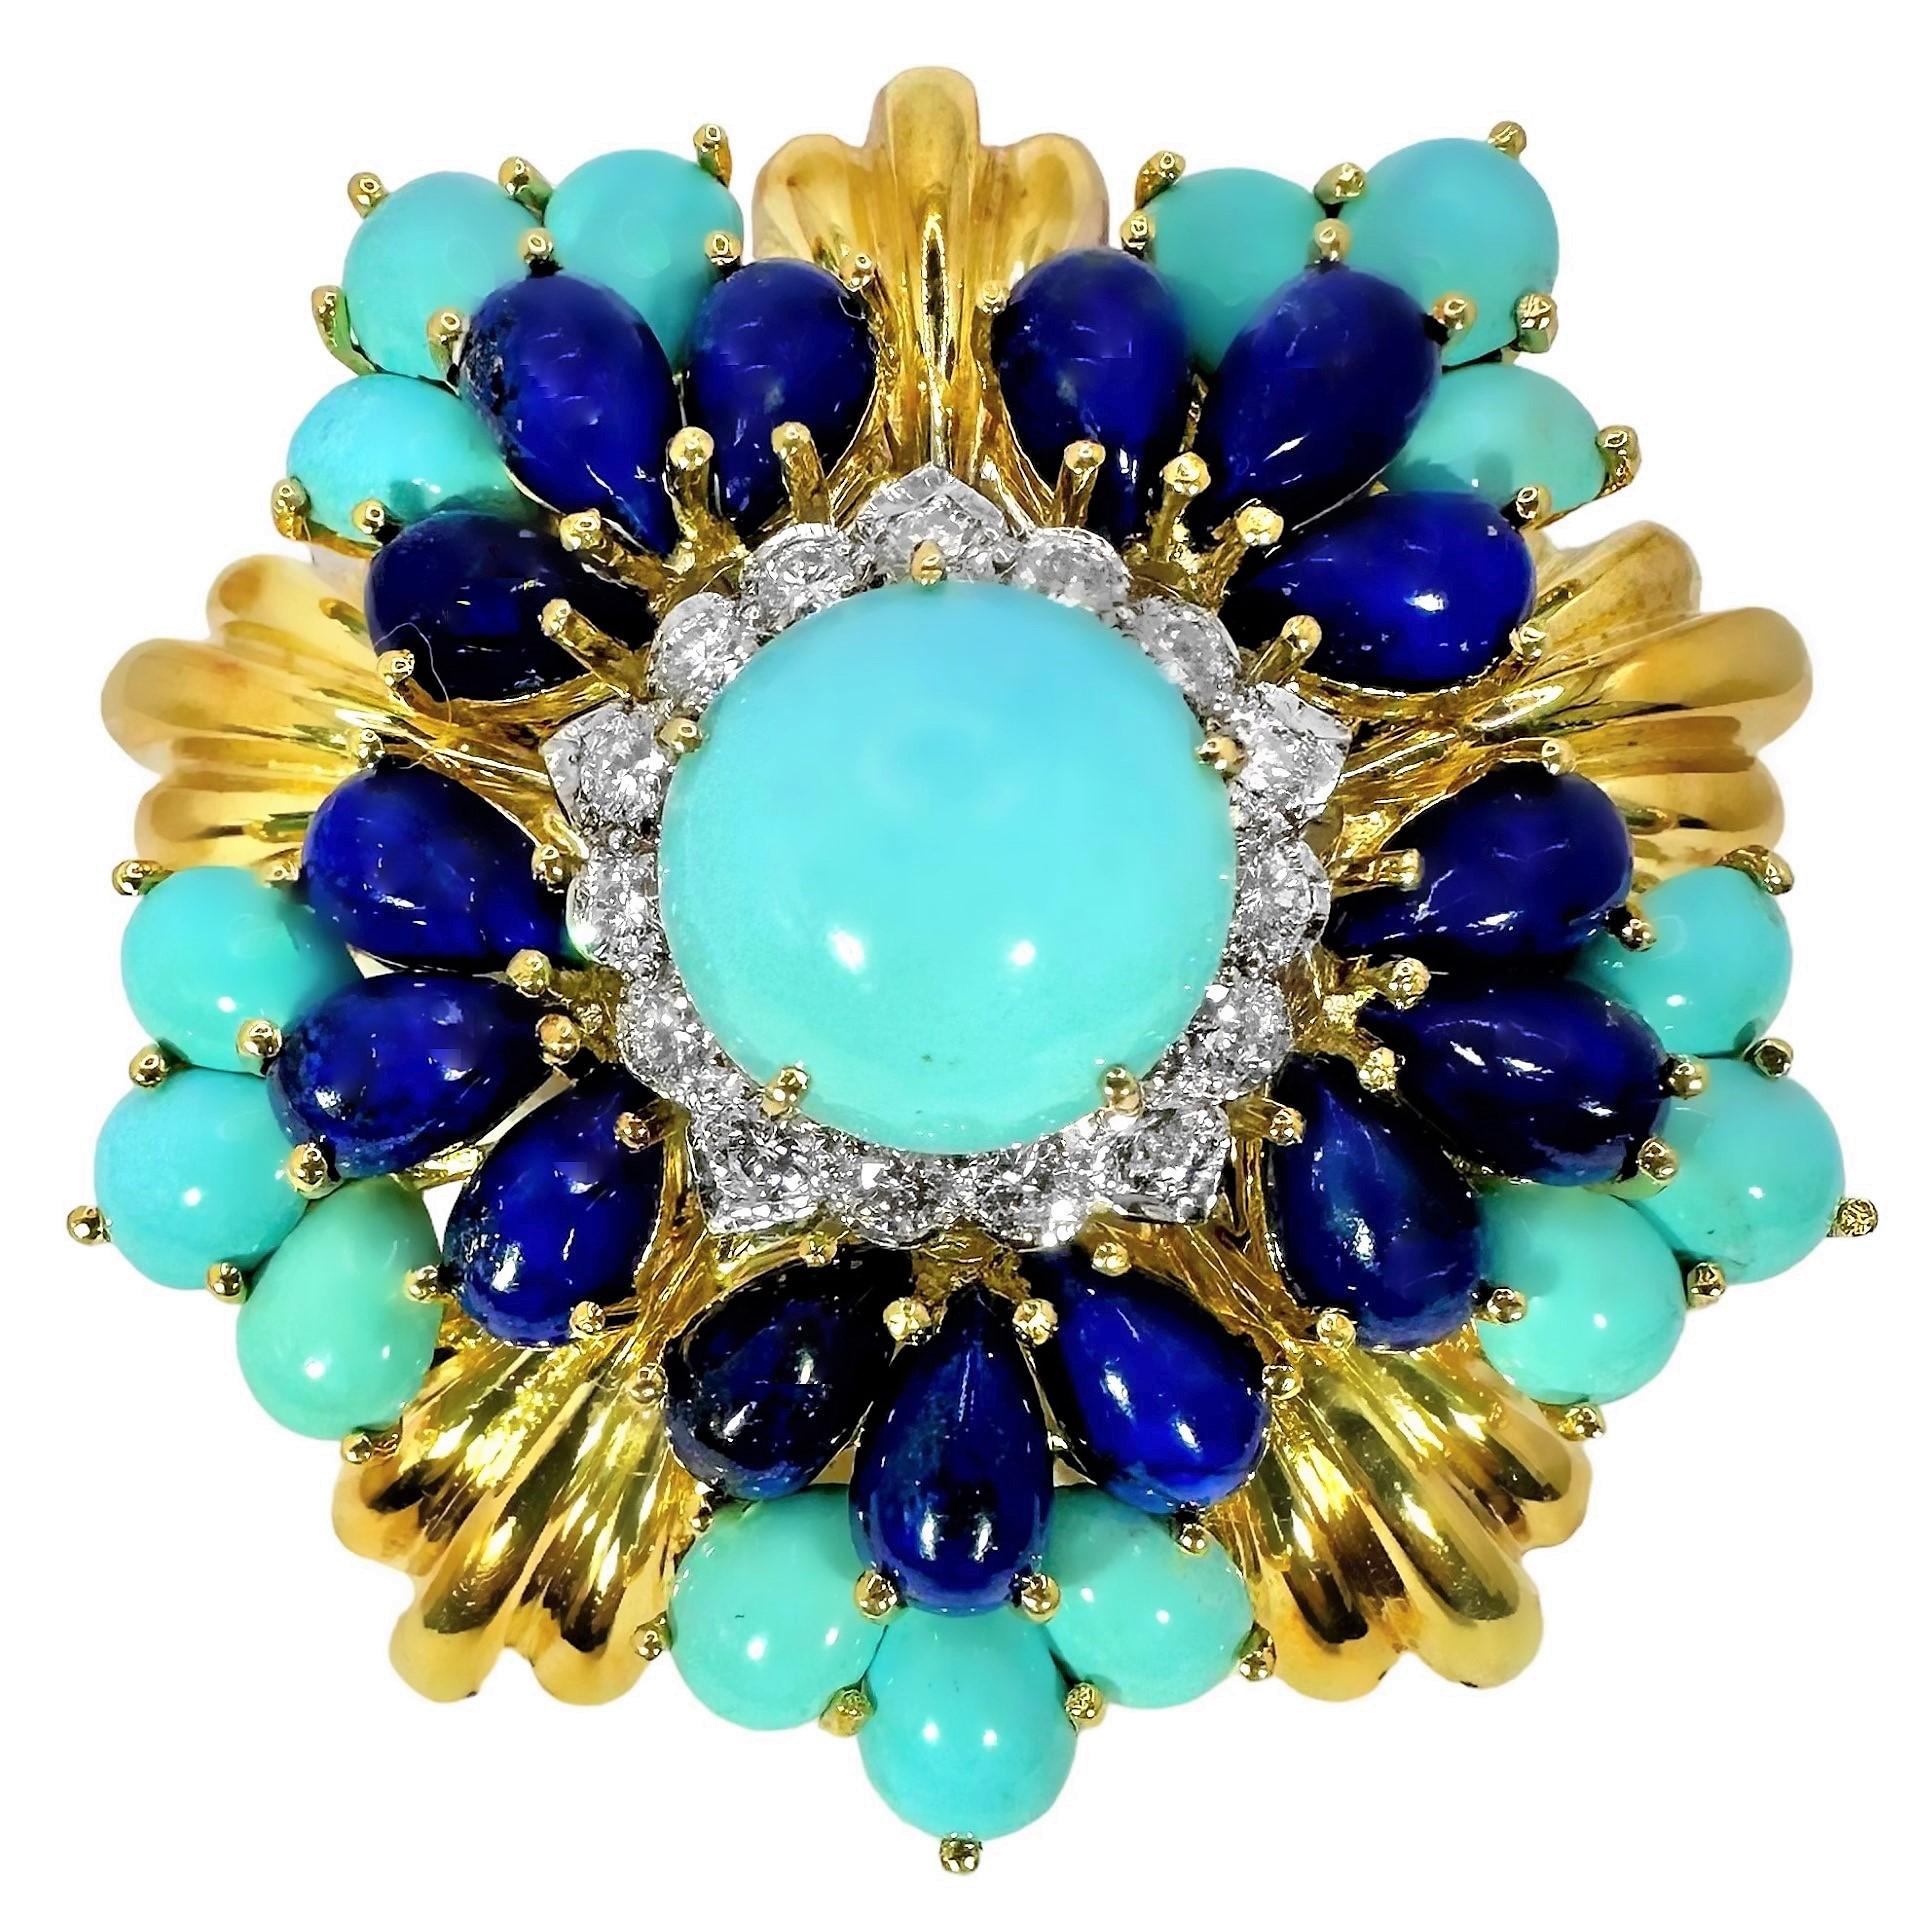 This wonderful Mid-20th Century 18k yellow gold pendant was created by highly regarded American manufacturer Montclair. It is in the style of a radiant flower with diamonds, fine turquoise, and lapis-lazuli. Total approximate diamond weight is